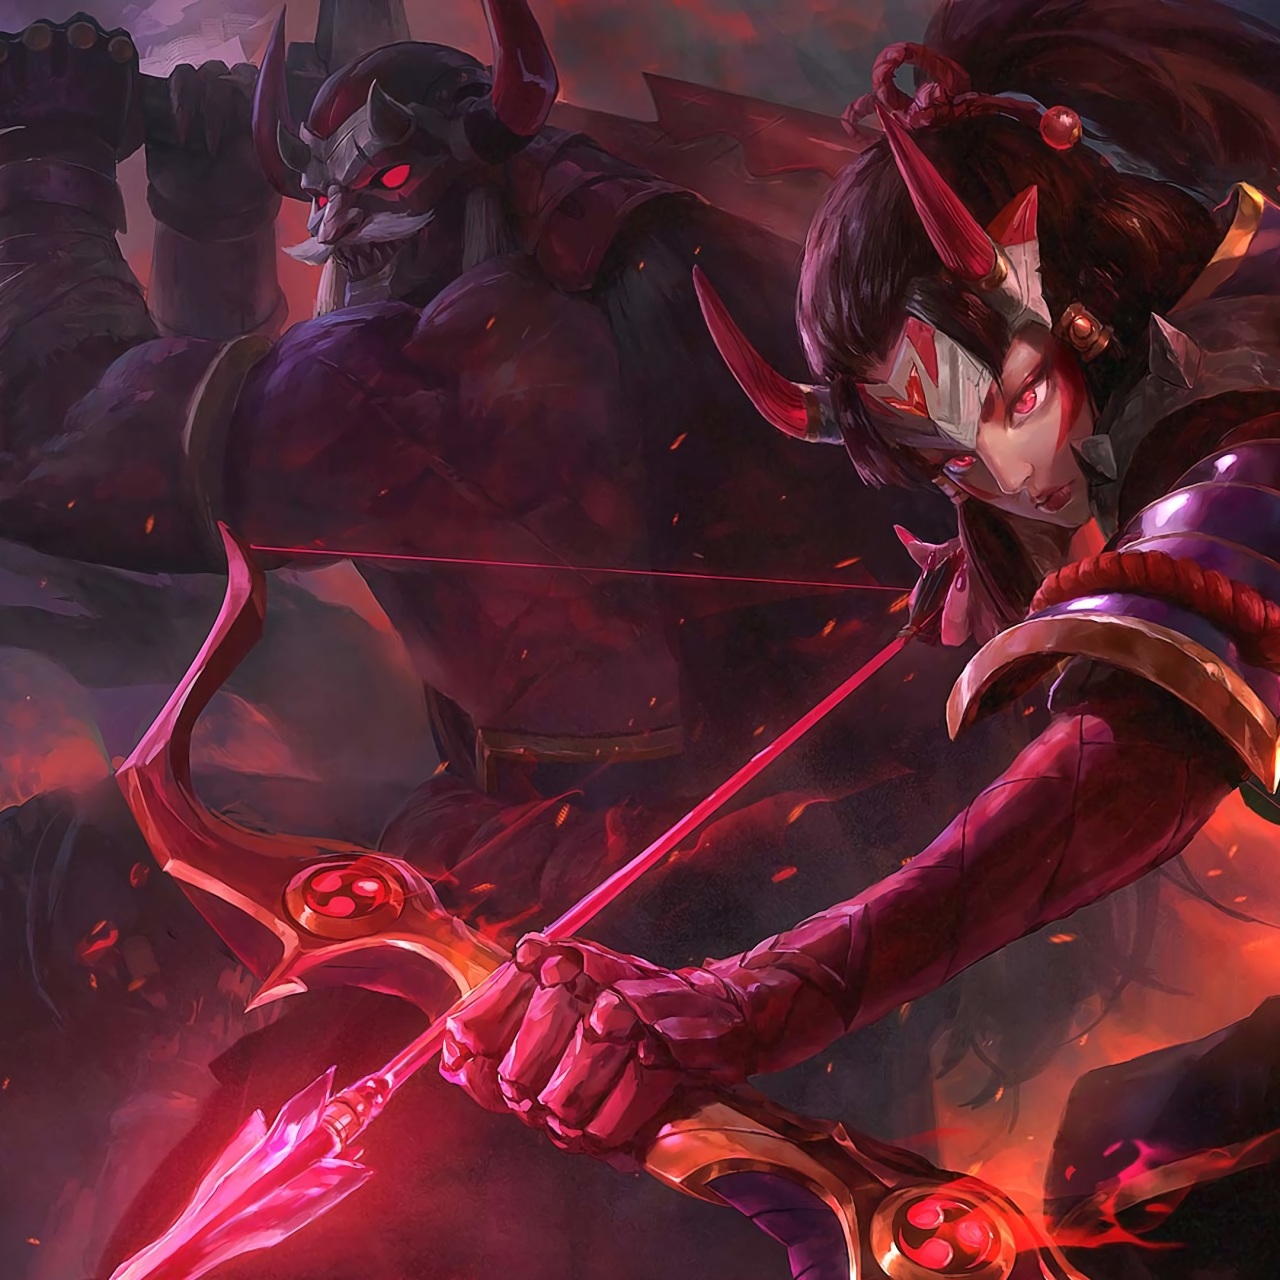 Wallpaper 4k Blood Moon Ashe And Tryndamere Lol League Of Legends Lol Ashe Blood Moon League Of Legends League Of Legends Tryndamere